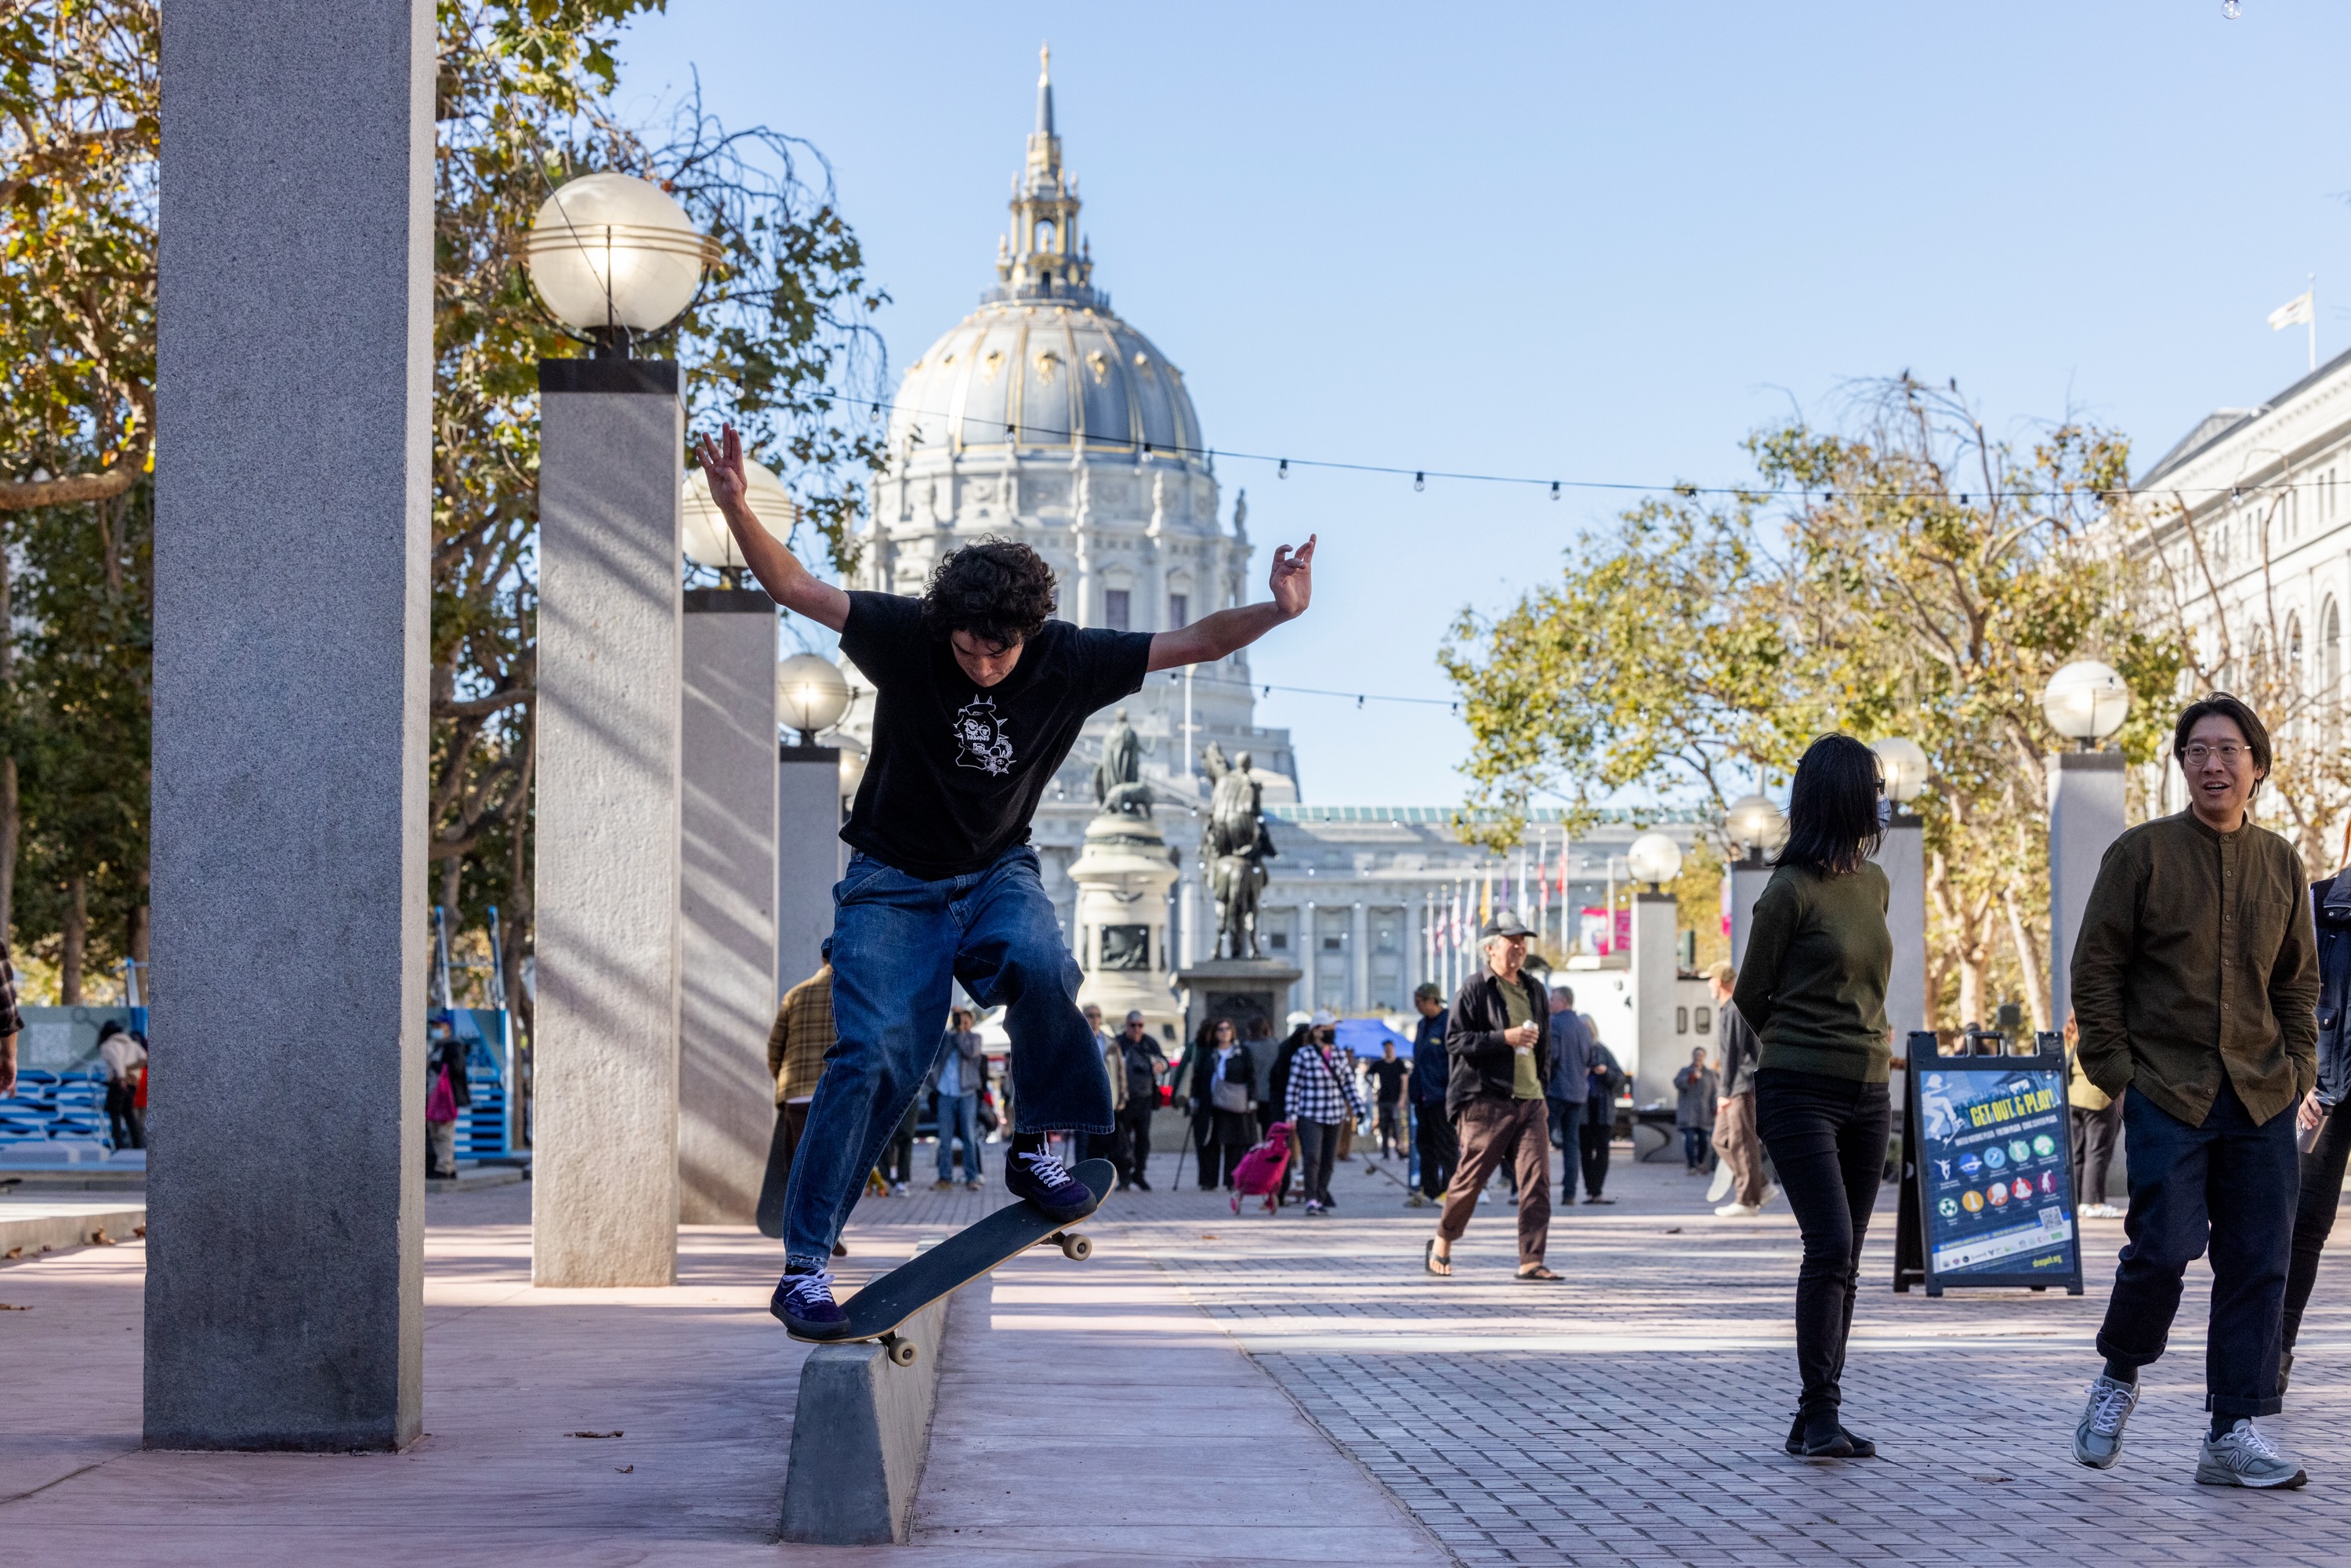 A skateboarder grinds a ledge in a plaza with a domed building in the background, as pedestrians walk by.